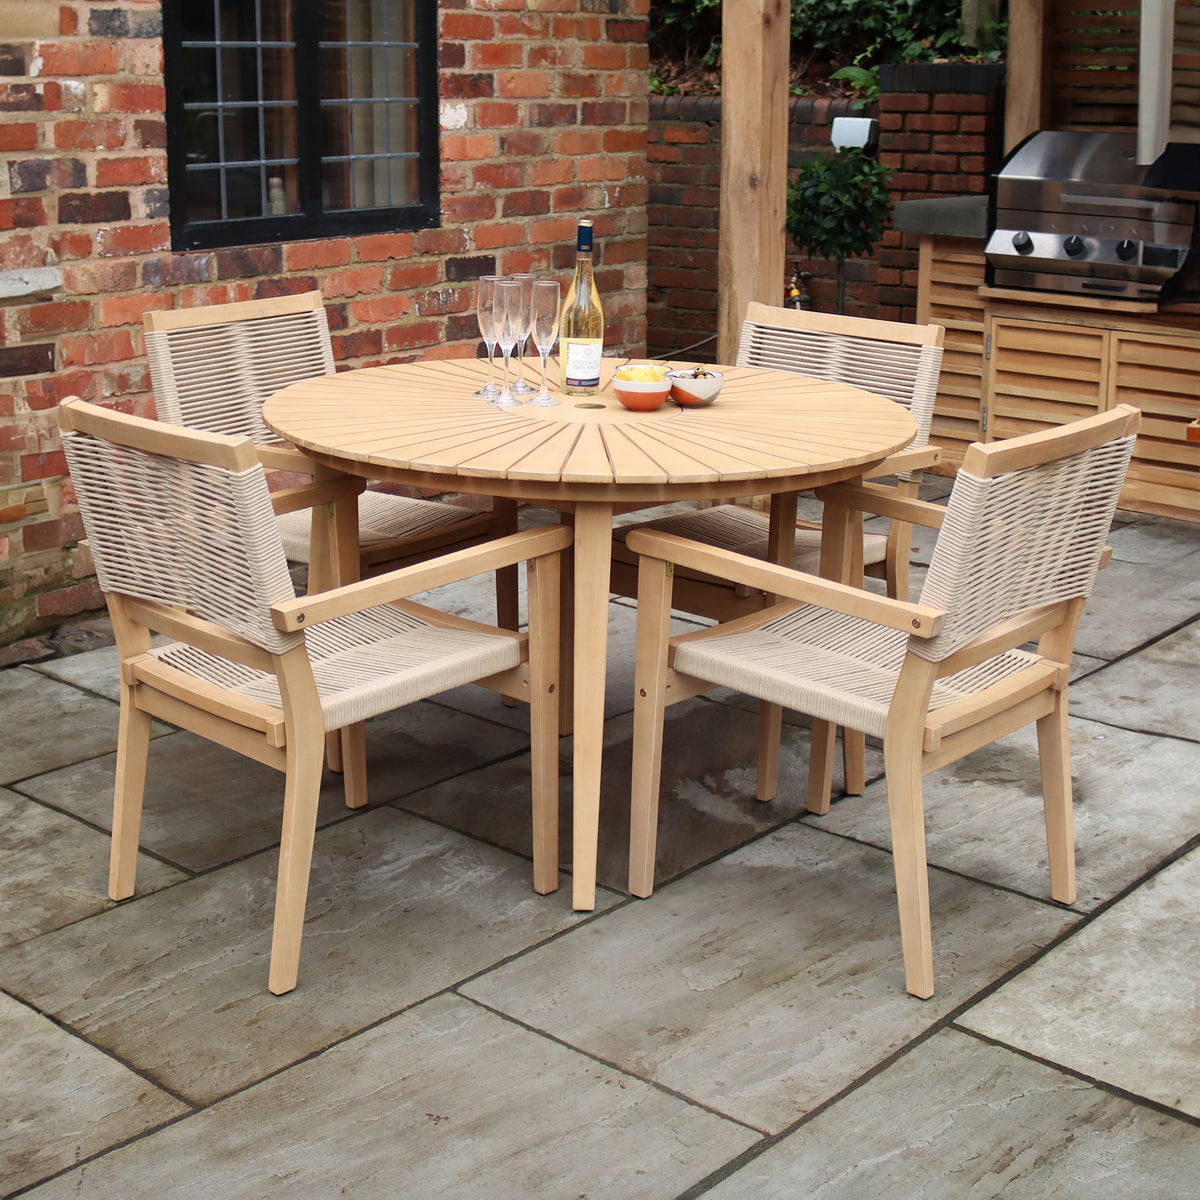 Roma FSC 120cm Table with 4 Stacking Rope Chairs from Roseland Furniture